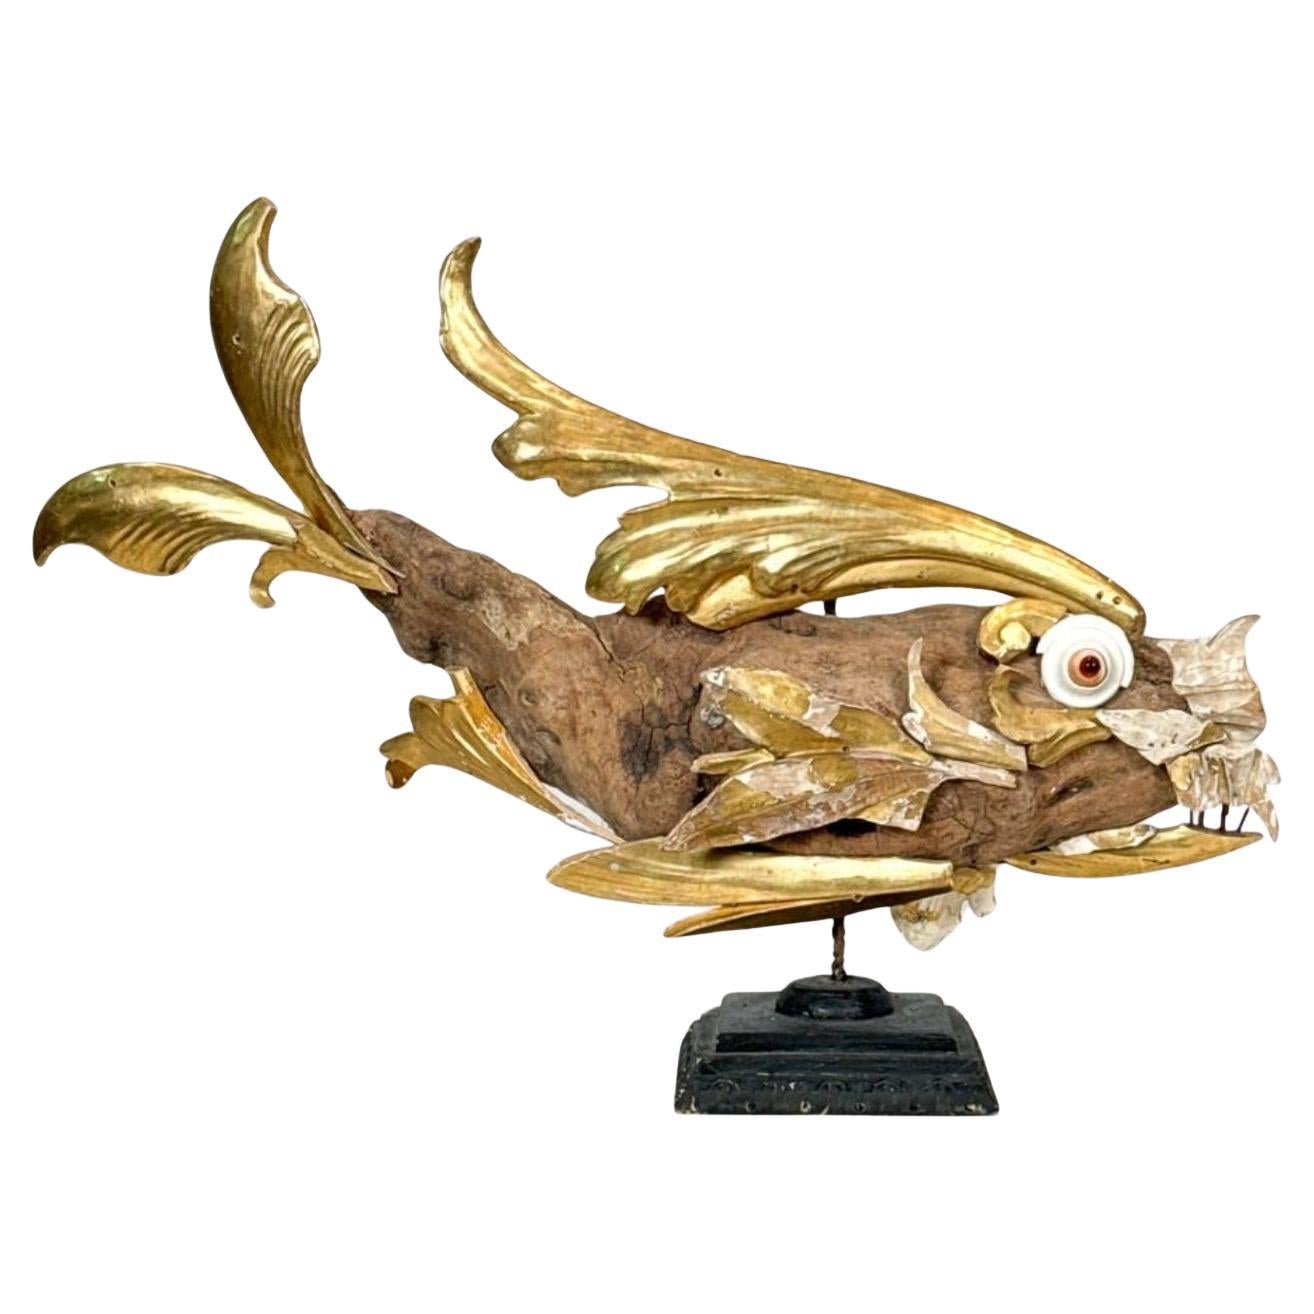 Italian Folk Art Fish Sculpture from 18th/19th Century Fragments Found Objects For Sale